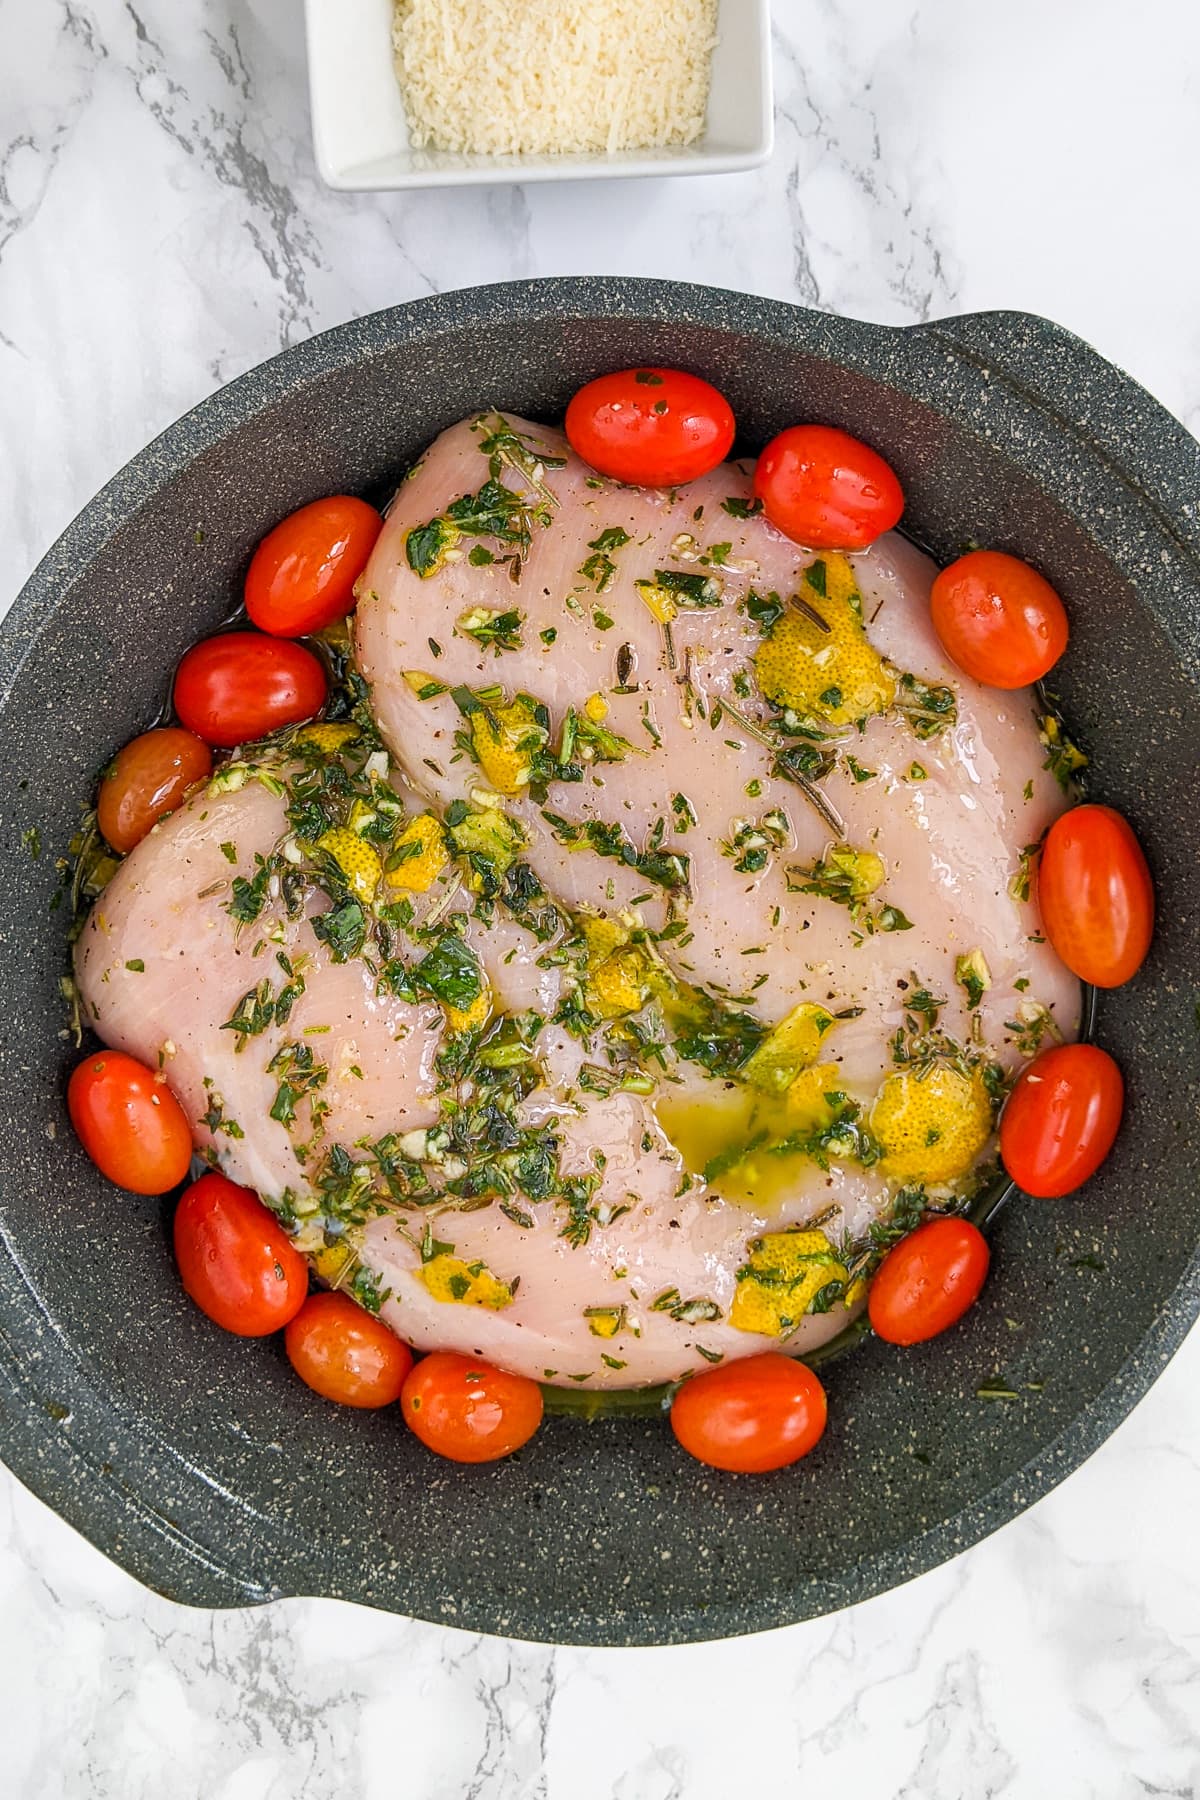 Cherry tomatoes near chicken breast marinated with Italian spices.